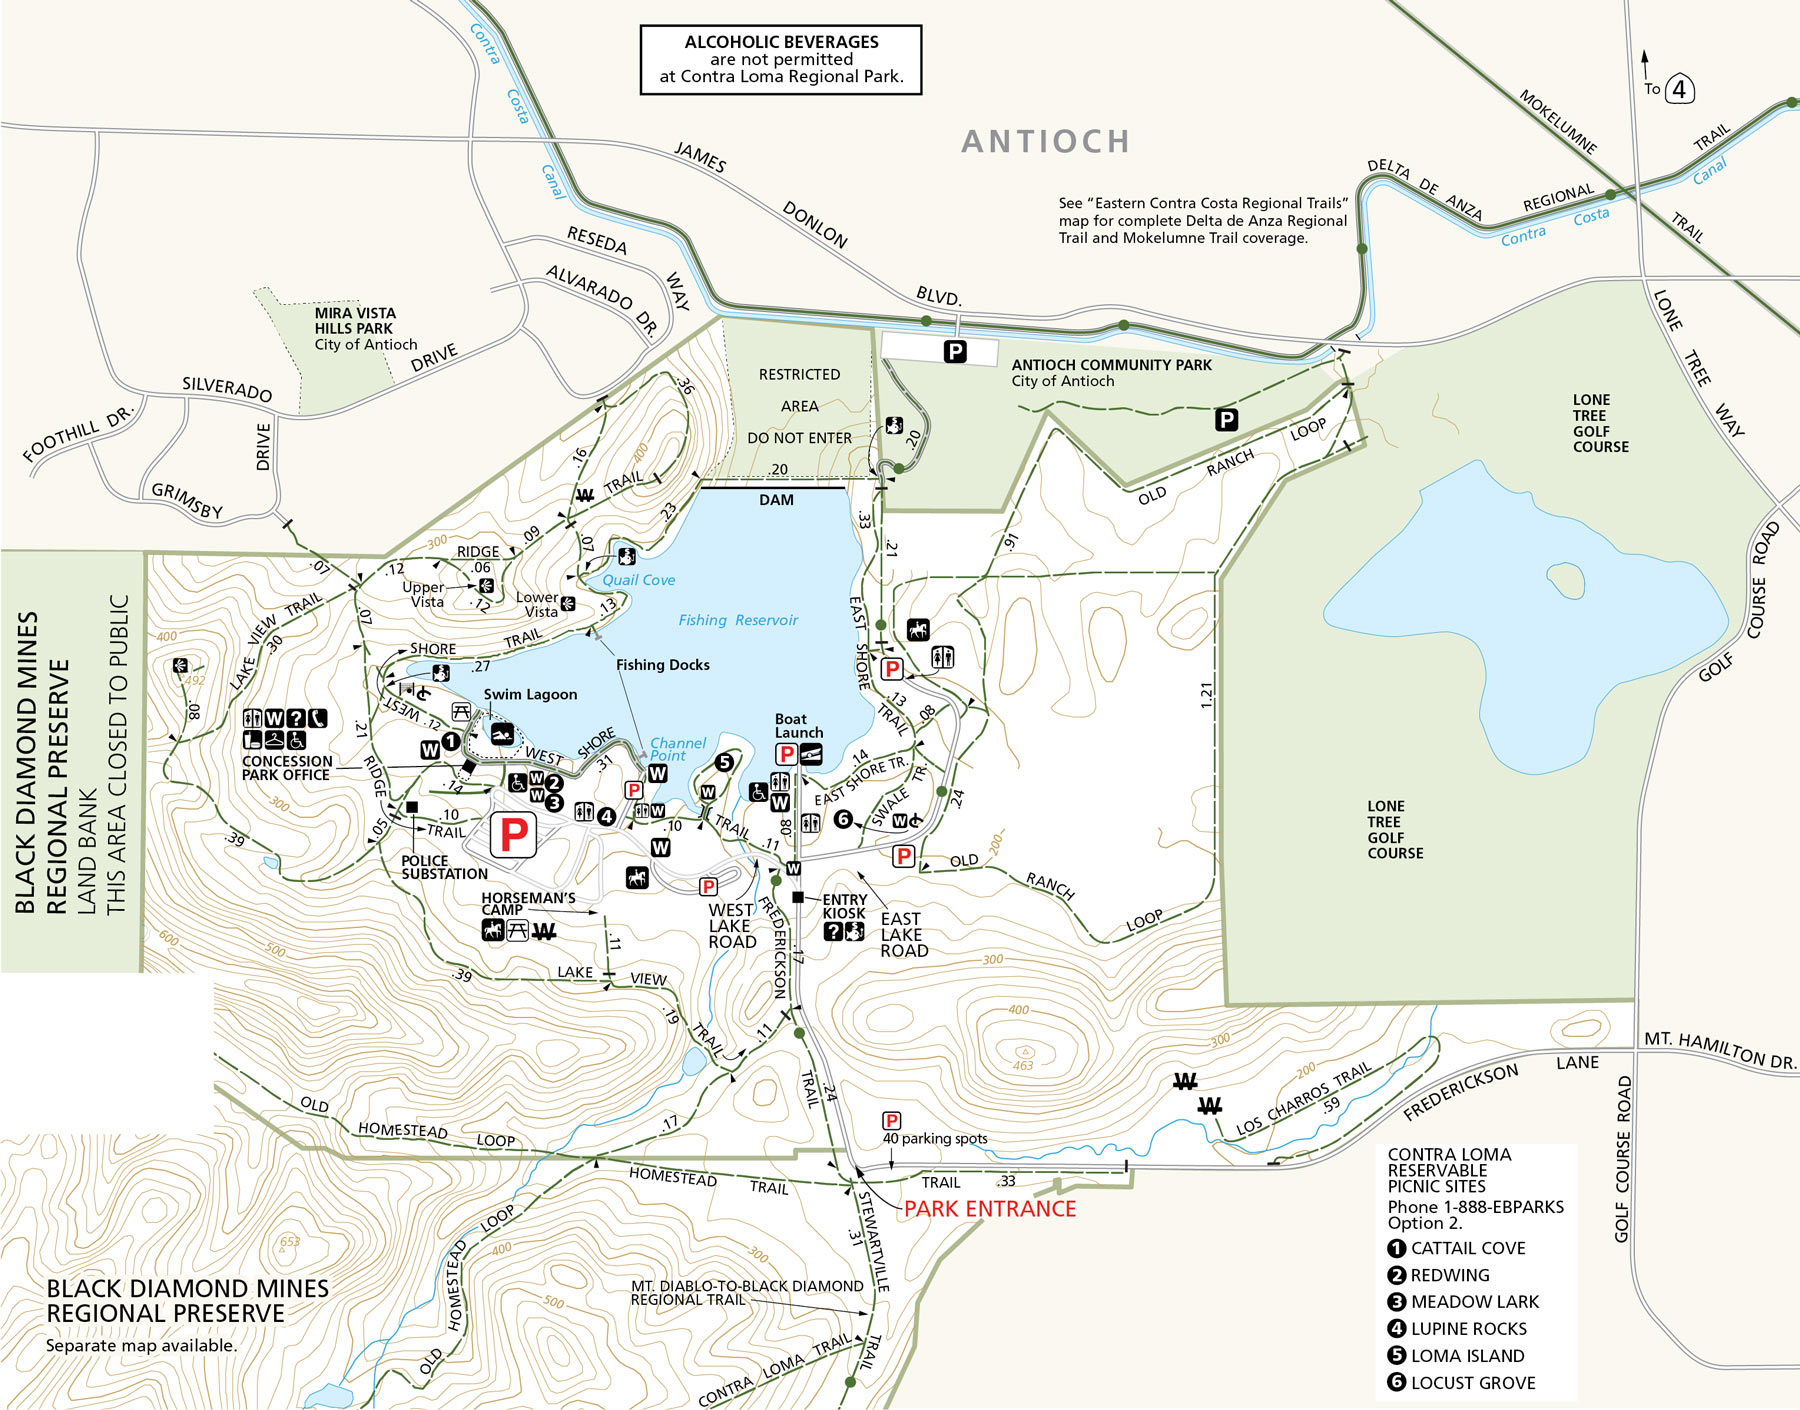 Map of Contra Loma Regional Park